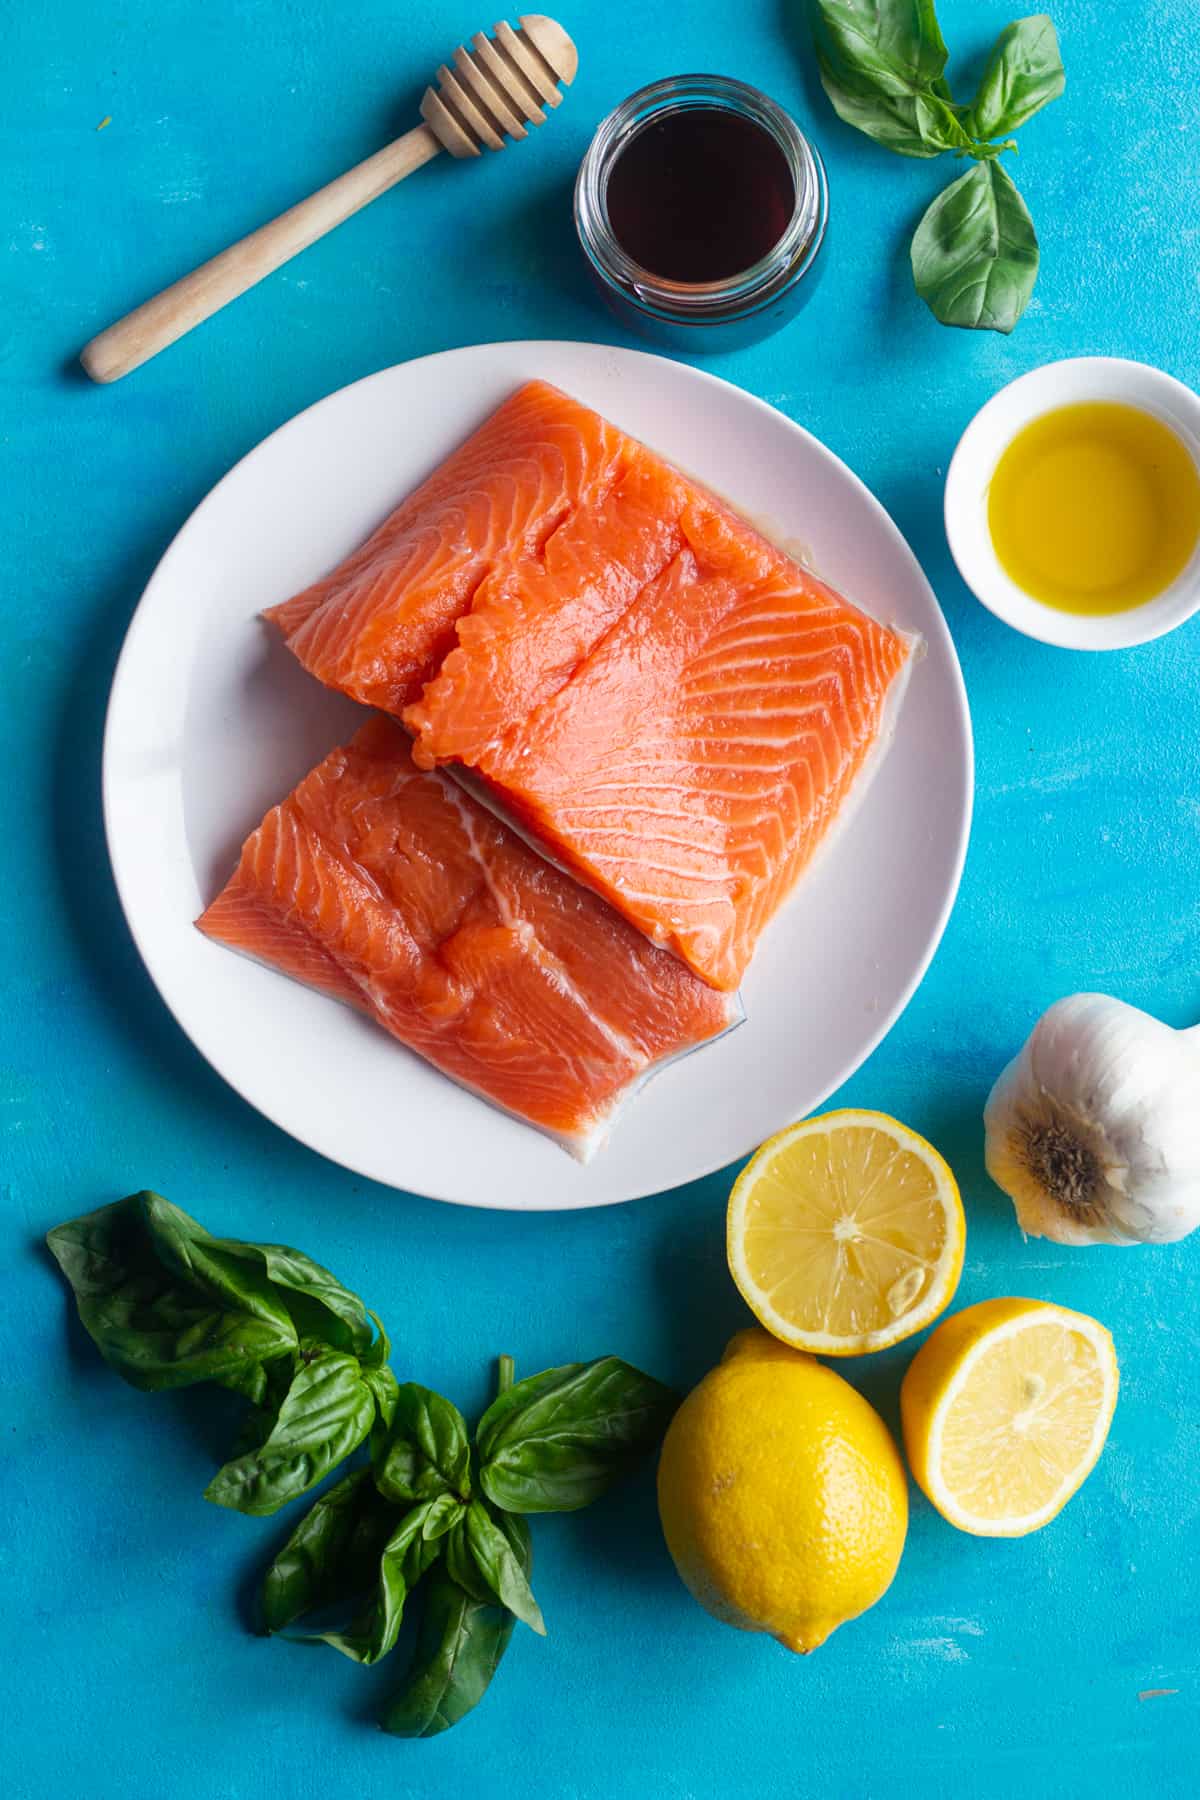 the ingredients to make baked salmon in foil are salmon, honey, garlic, lemon juice, olive oil and basil. 